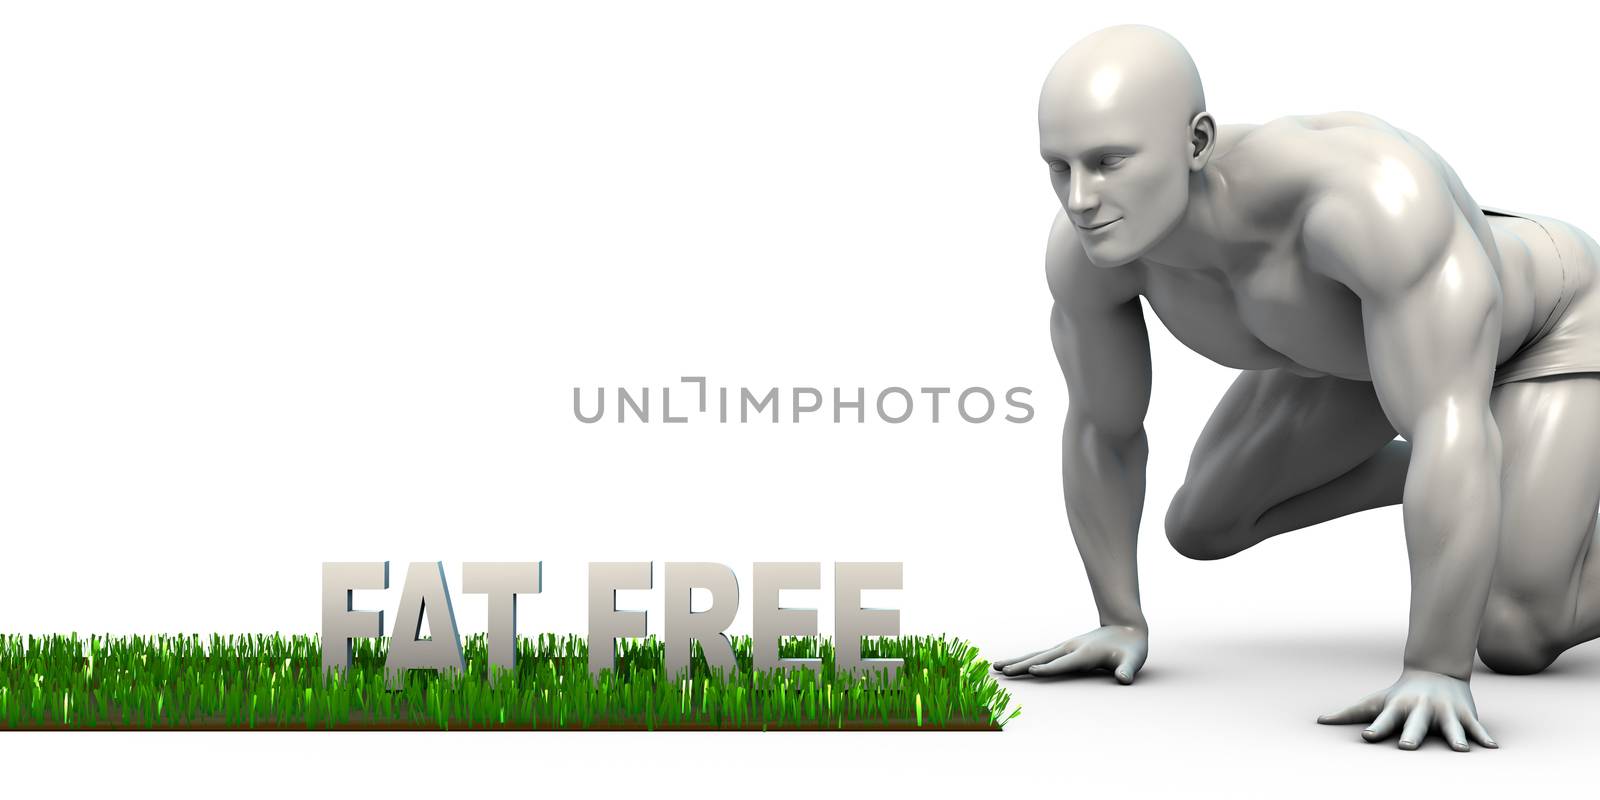 Fat Free Concept with Man Looking Closely to Verify